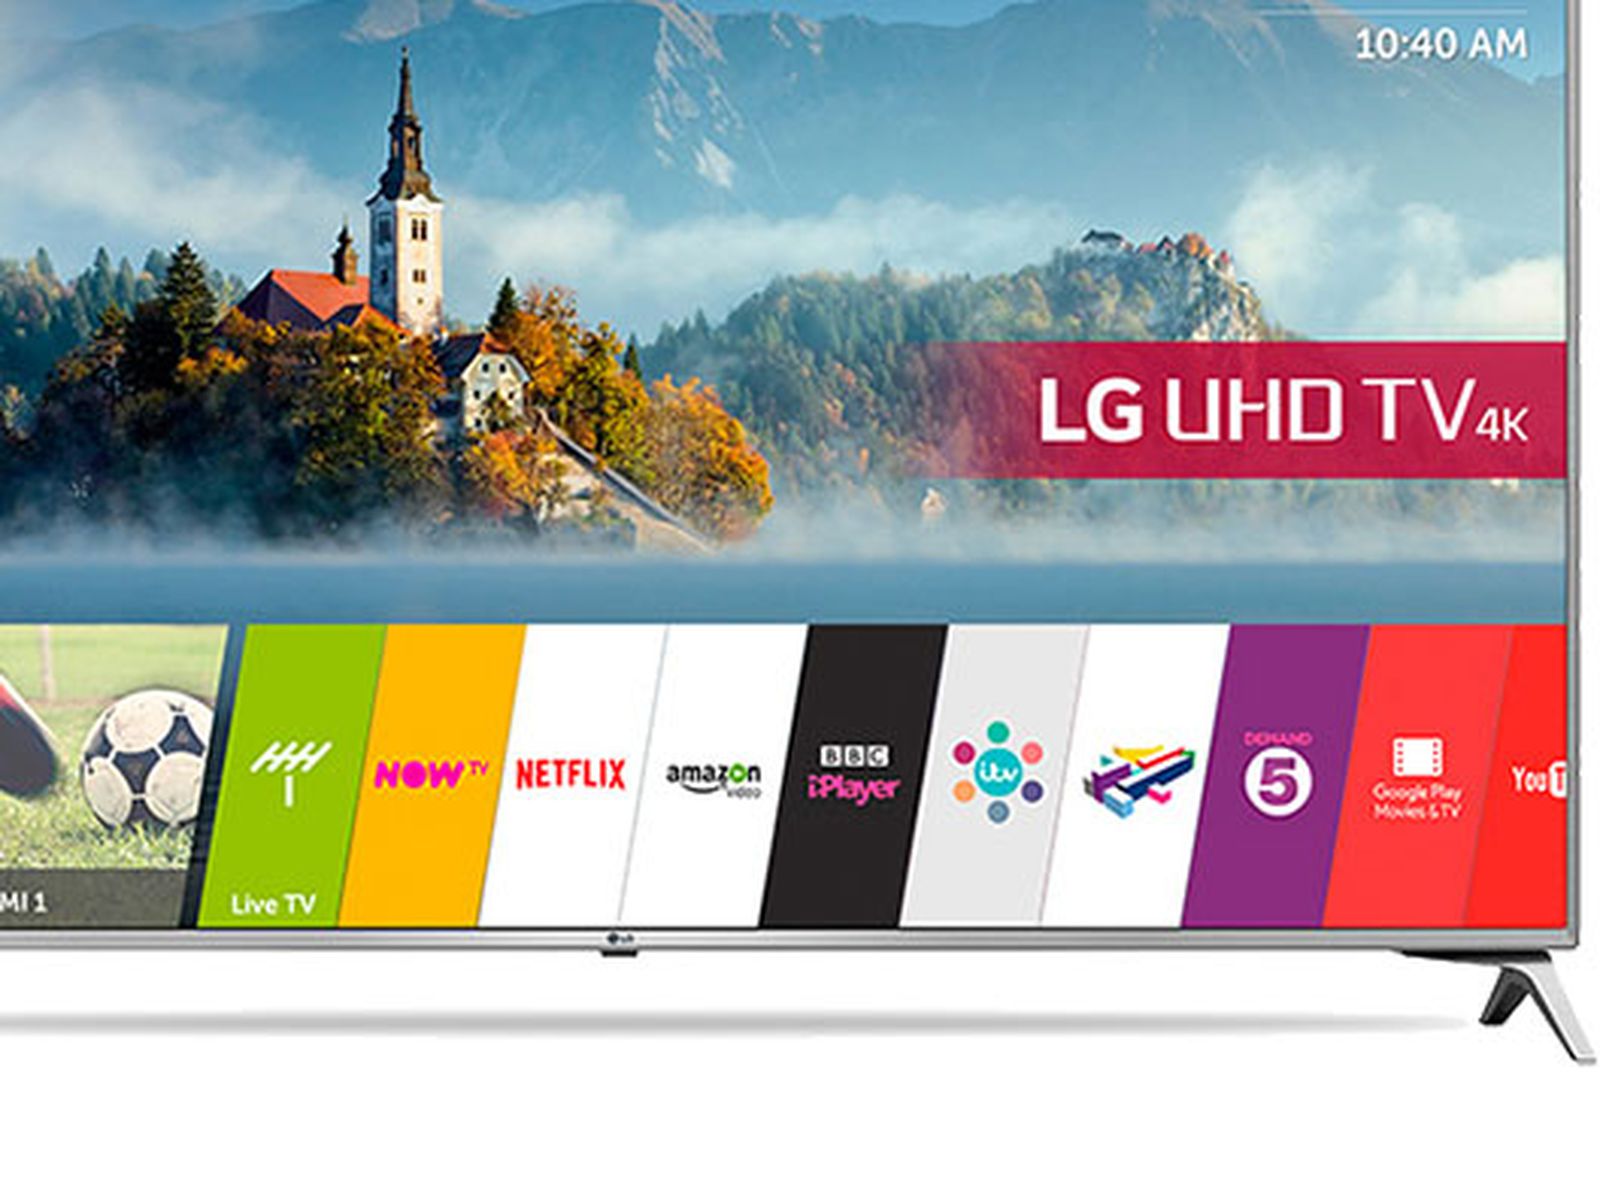 How To Update App On LG Smart TV